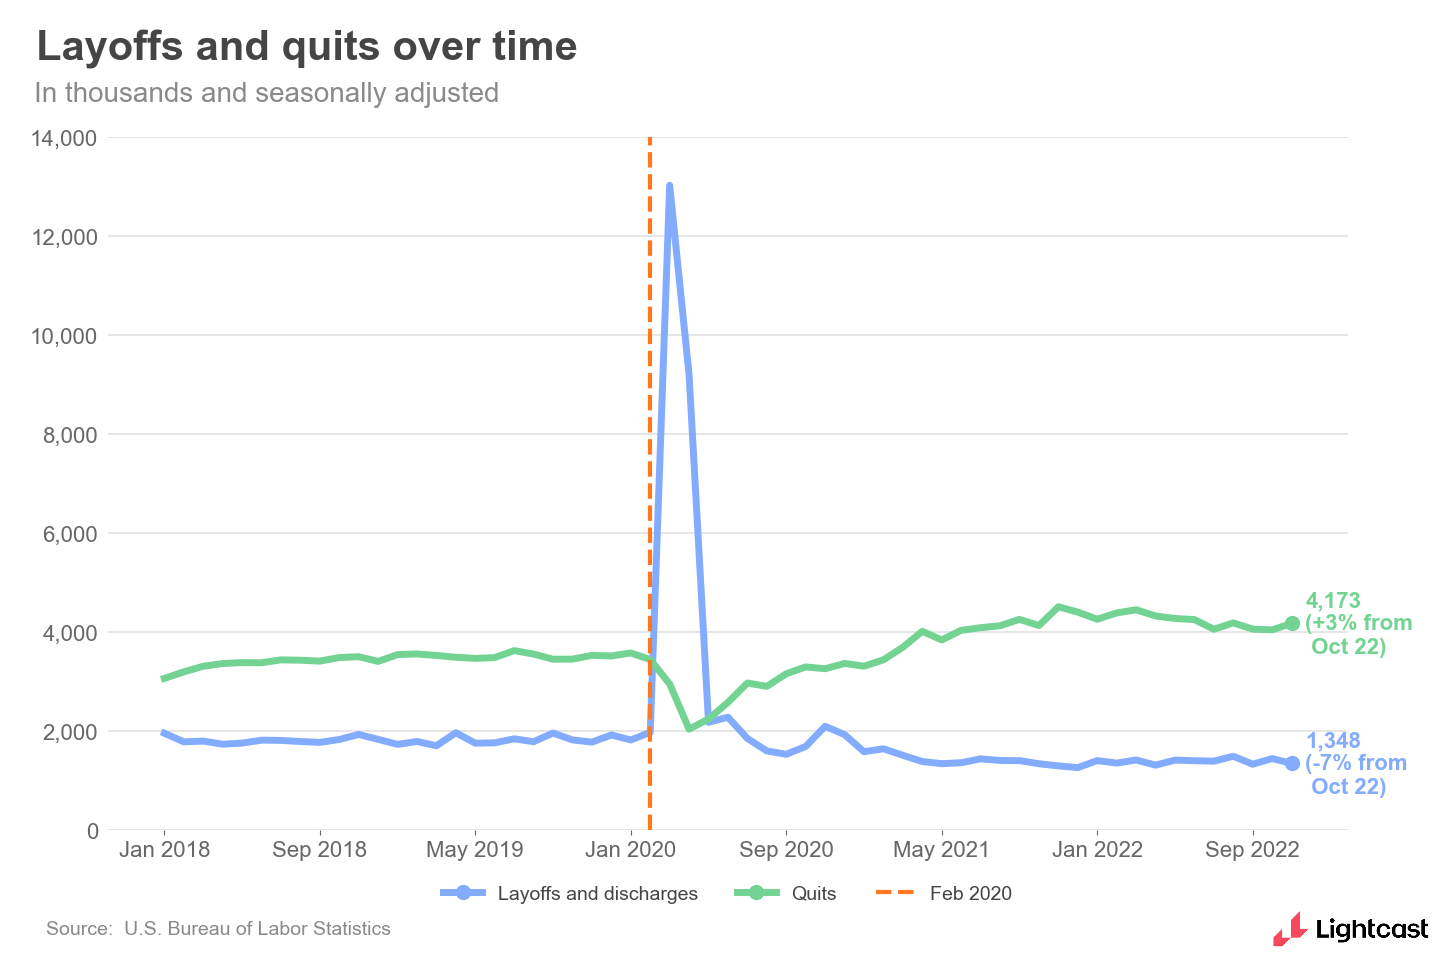 chart showing layoffs and quits over time